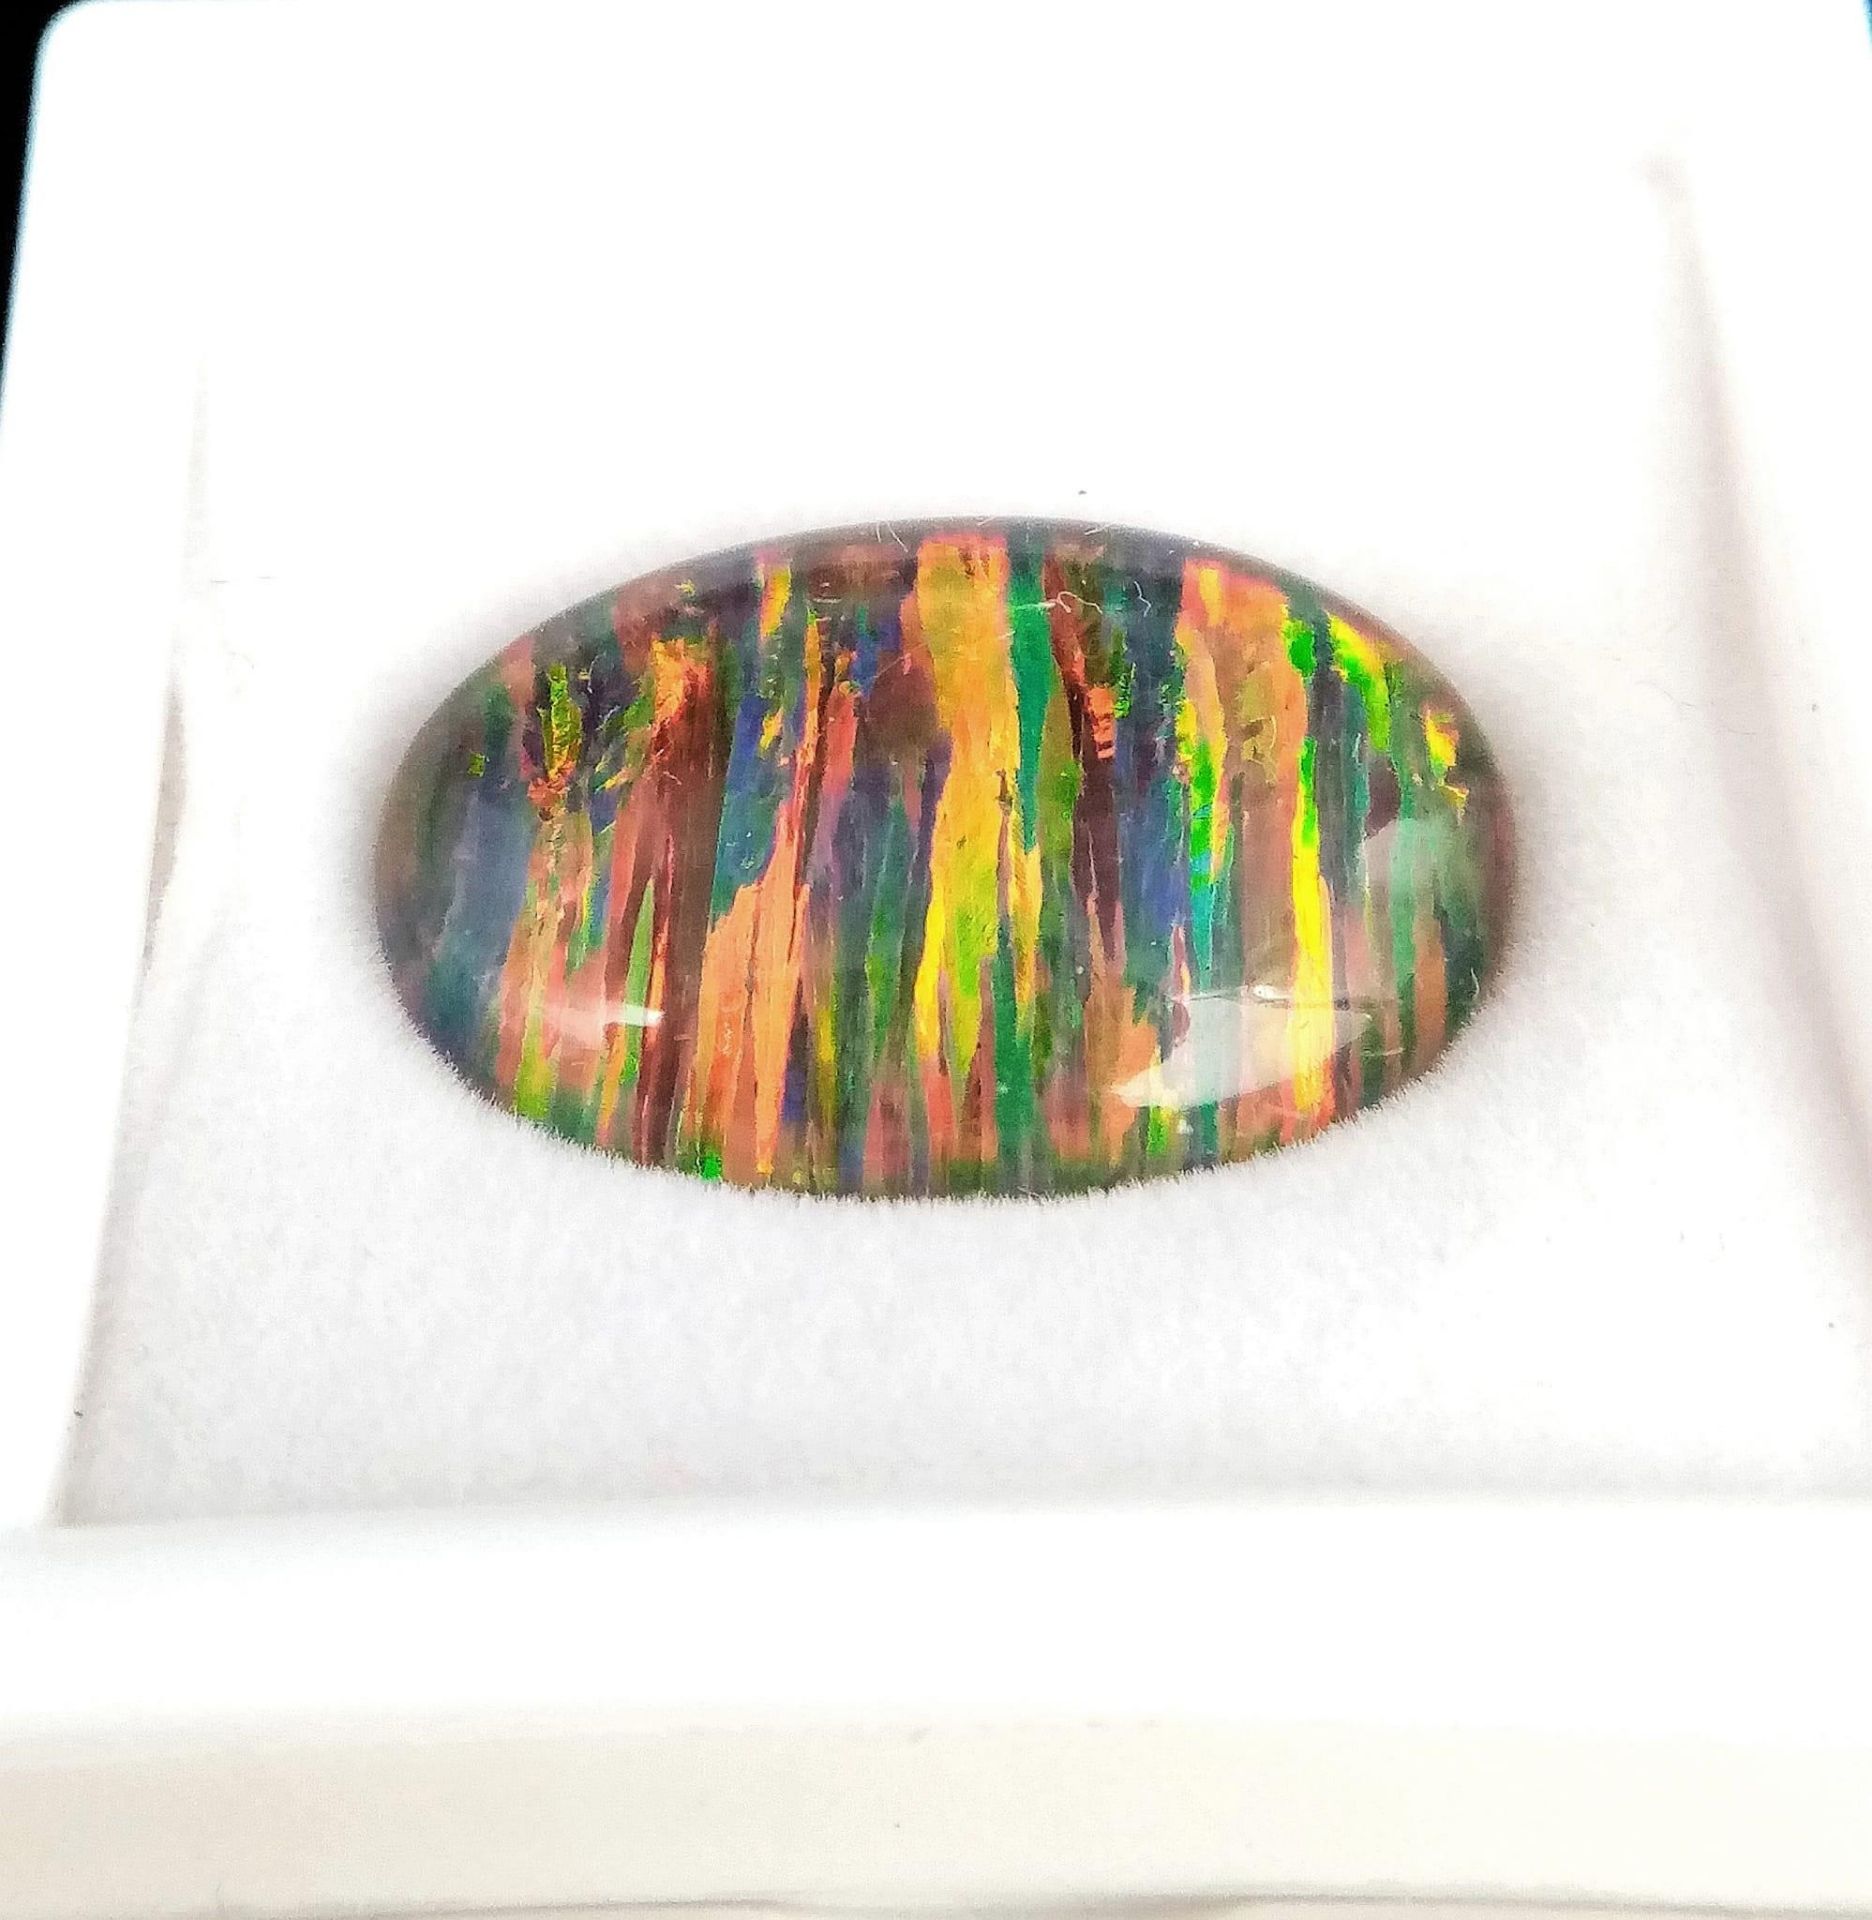 A truly magnificent, large (17.2 carats) GIBSON OPAL oval cabochon. Strong red and metallic green